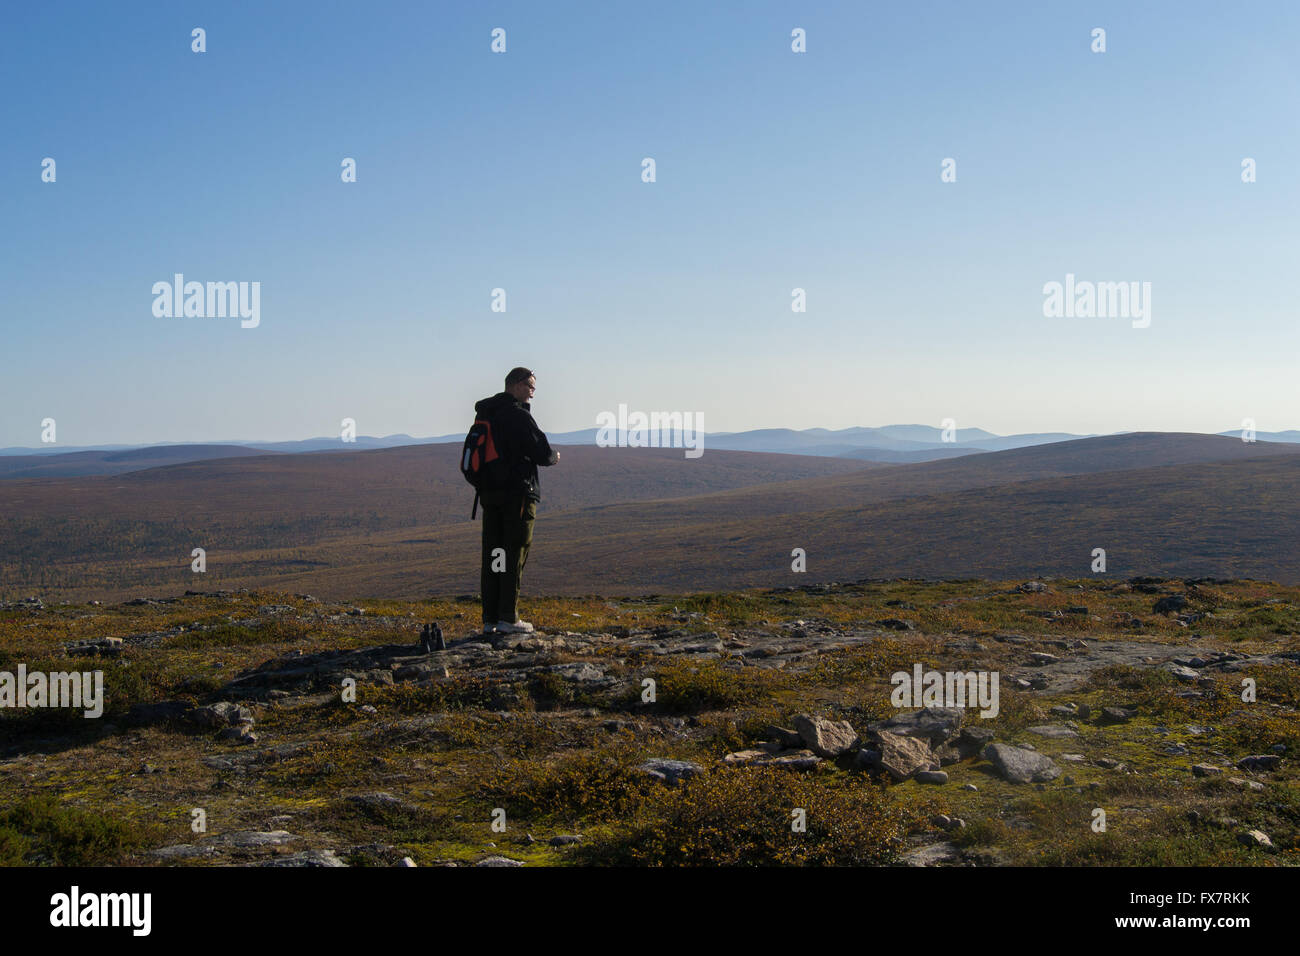 A man standing and looking to mountain scenery Stock Photo